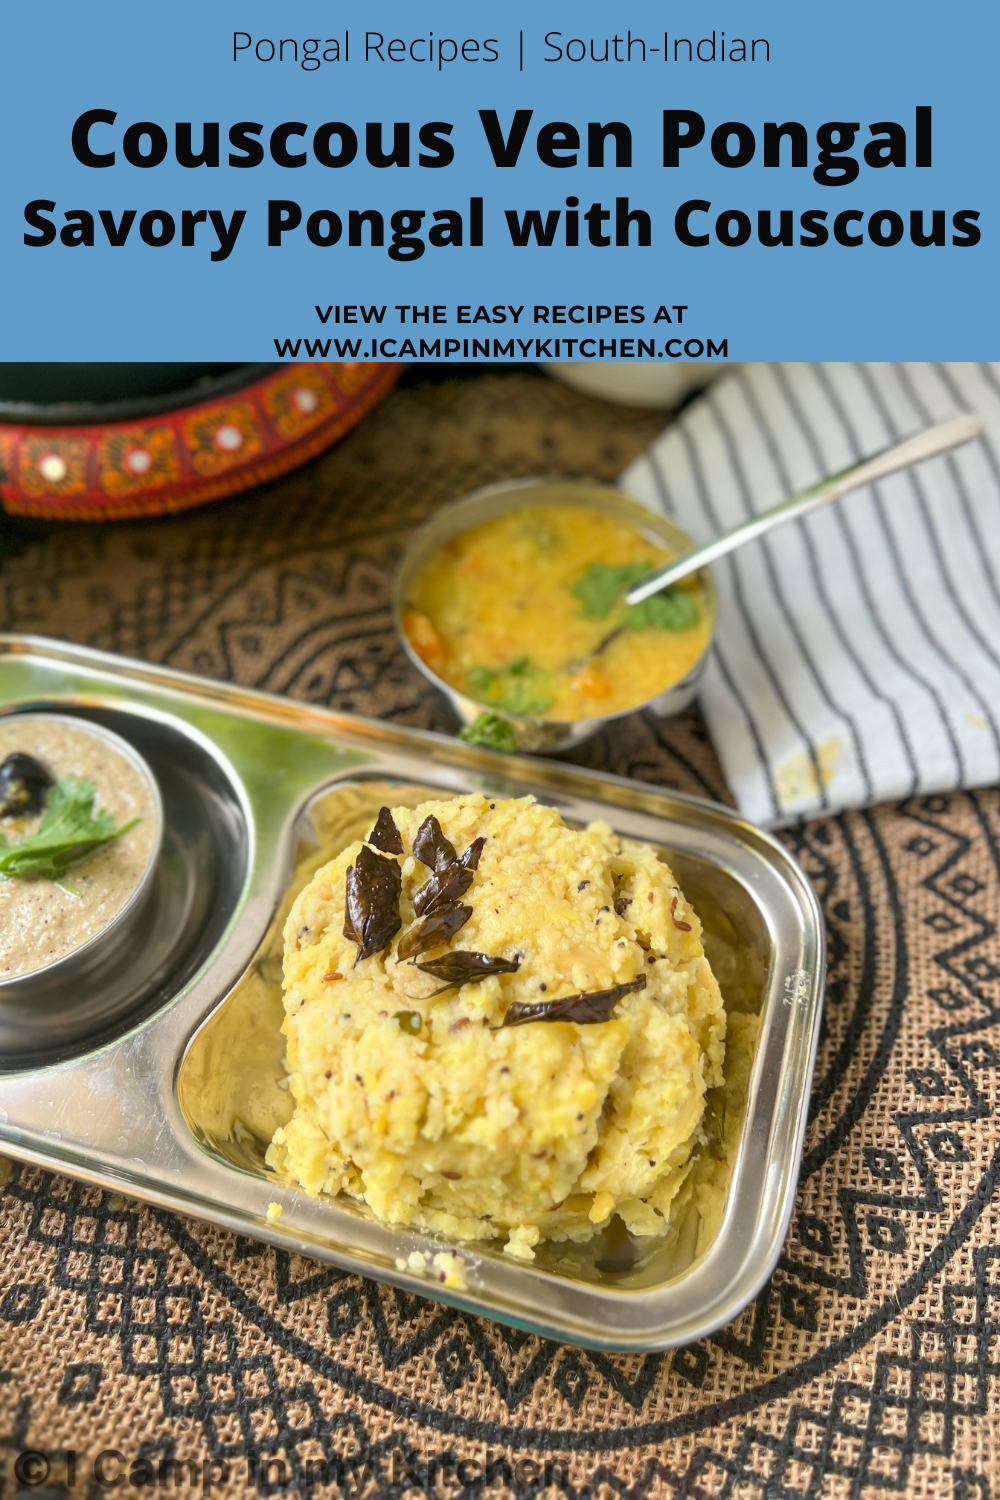 Savory Pongal with couscous